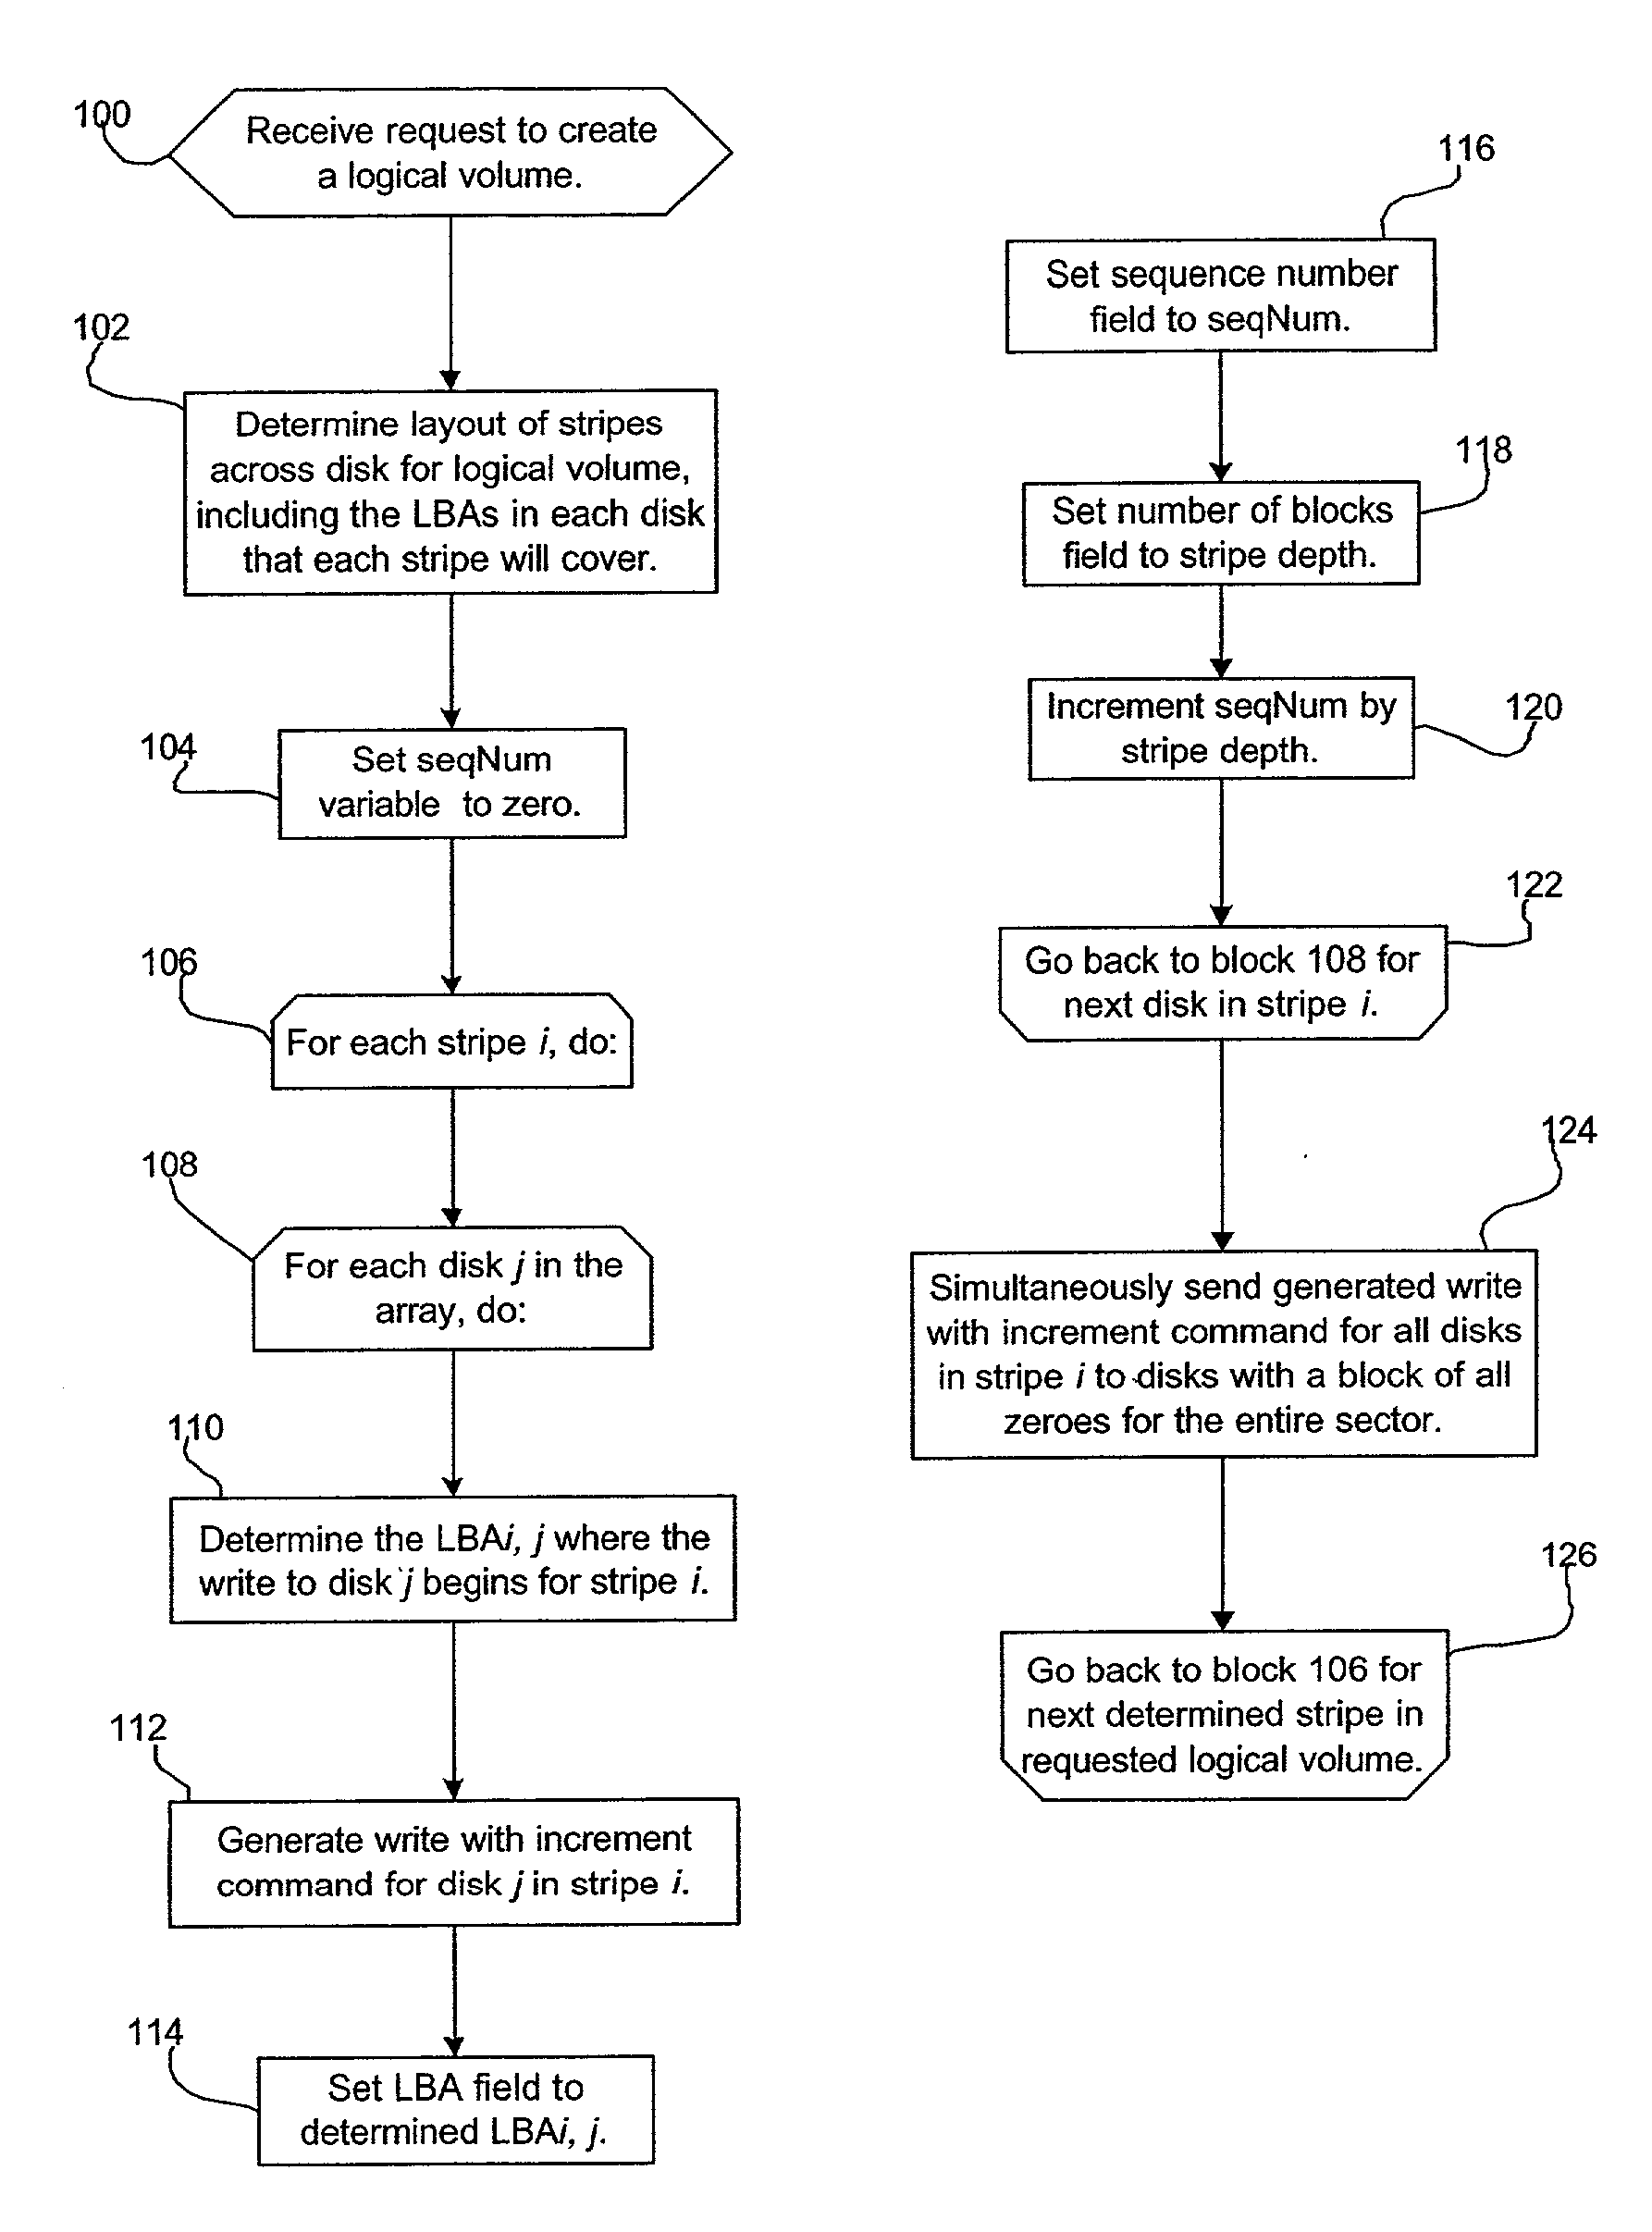 Method, system and program for initializing a storage device comprising multiple storage units through a storage controller